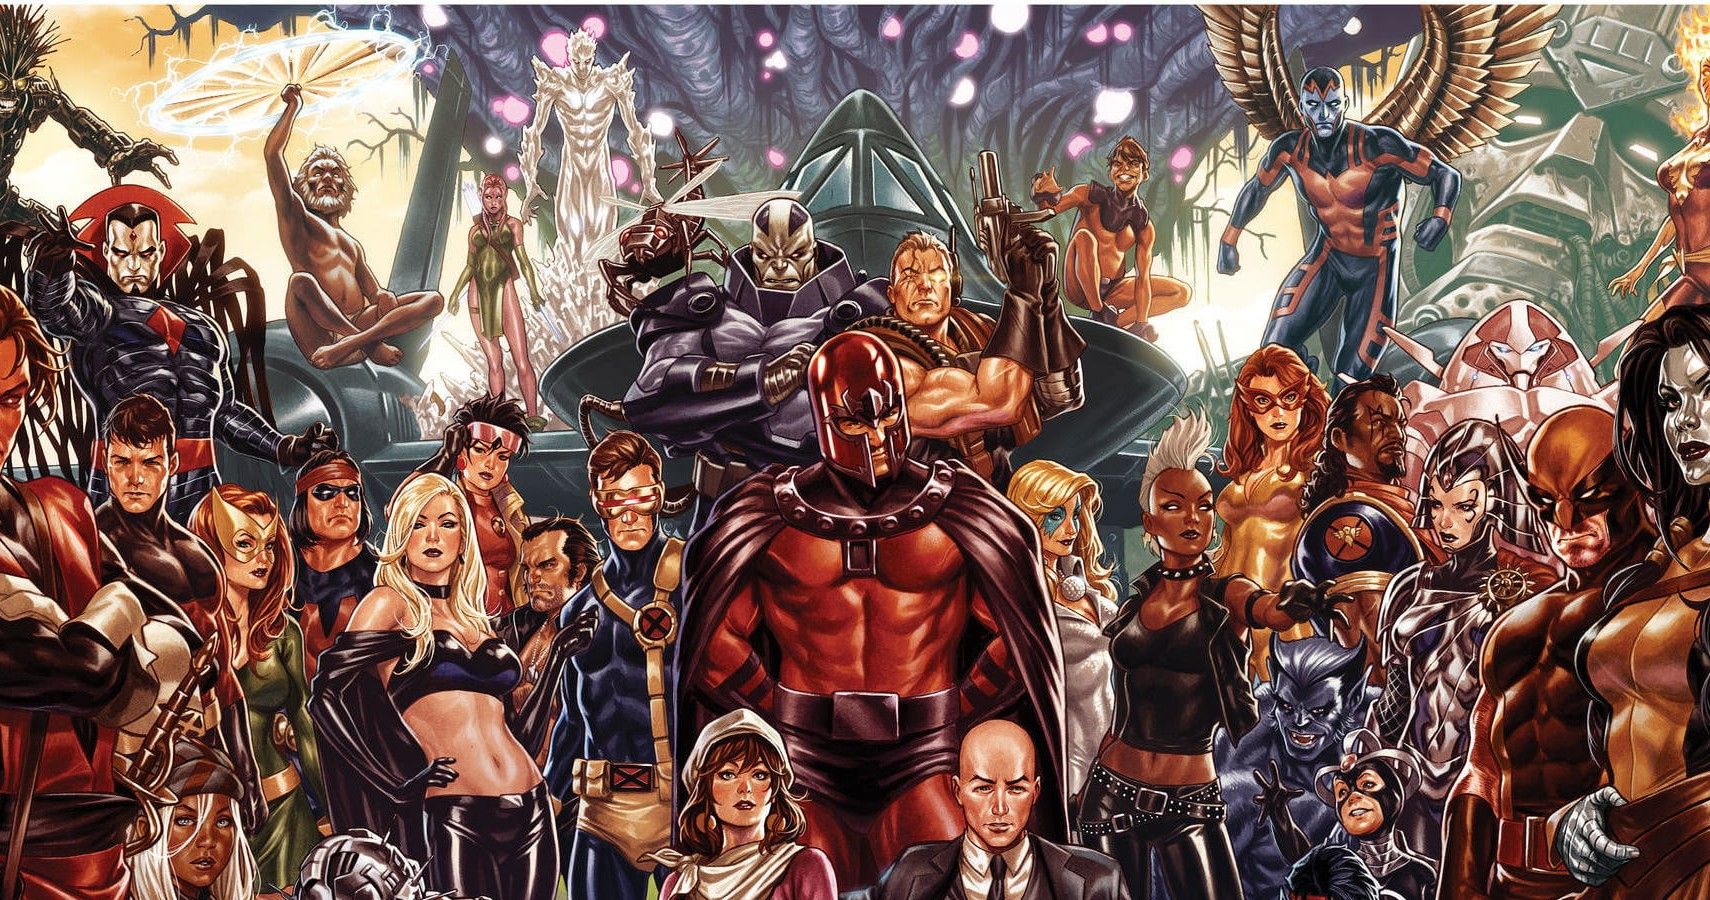 Will The XMen Come To Marvels Avengers